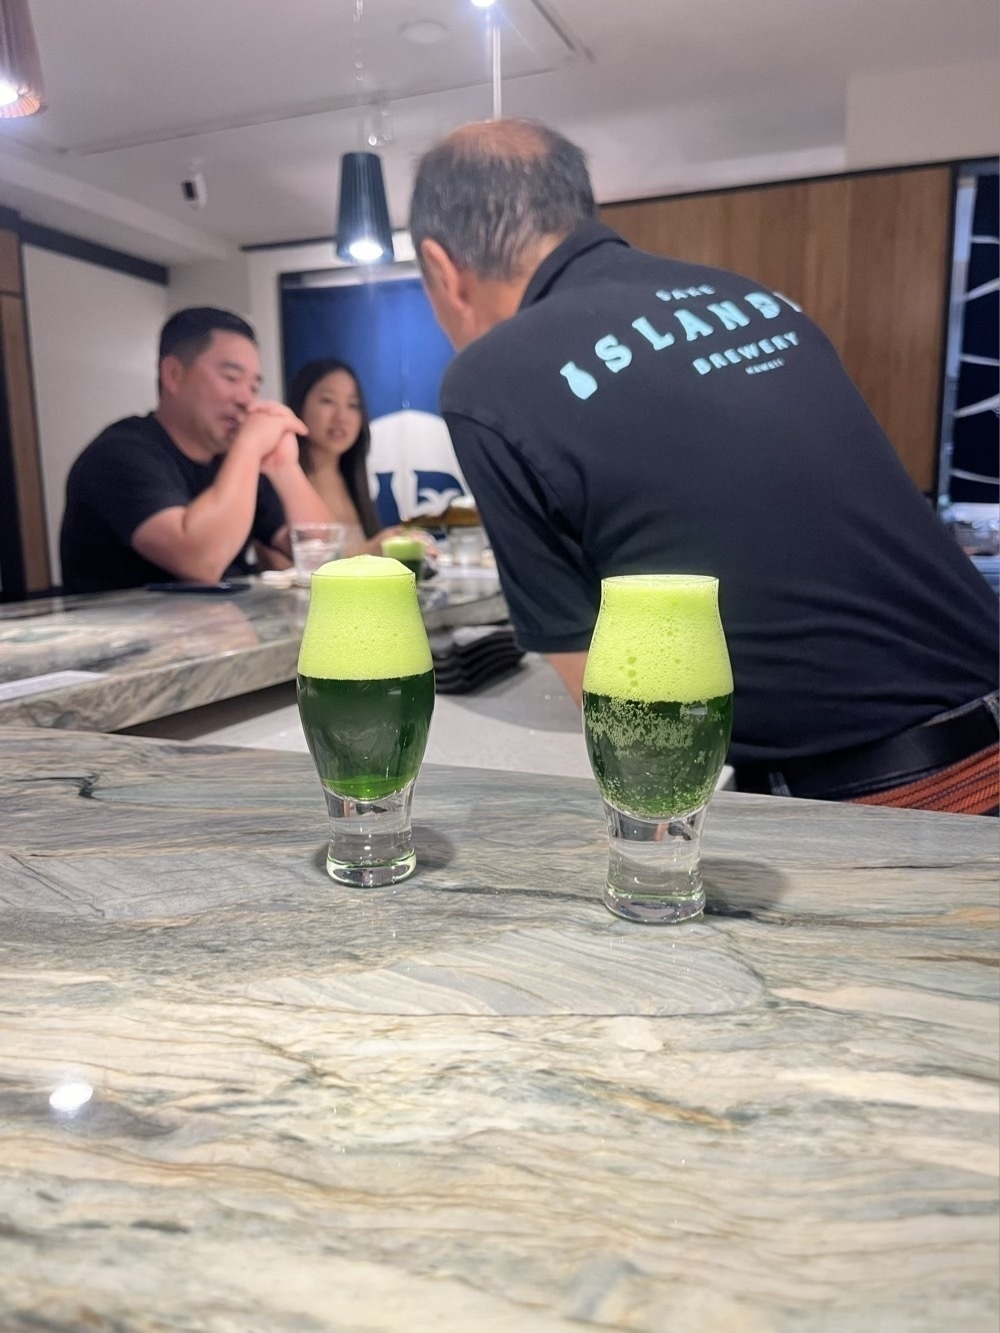 Two small glasses of green matcha beer, an IPA, with the server in the background serving two other customers.